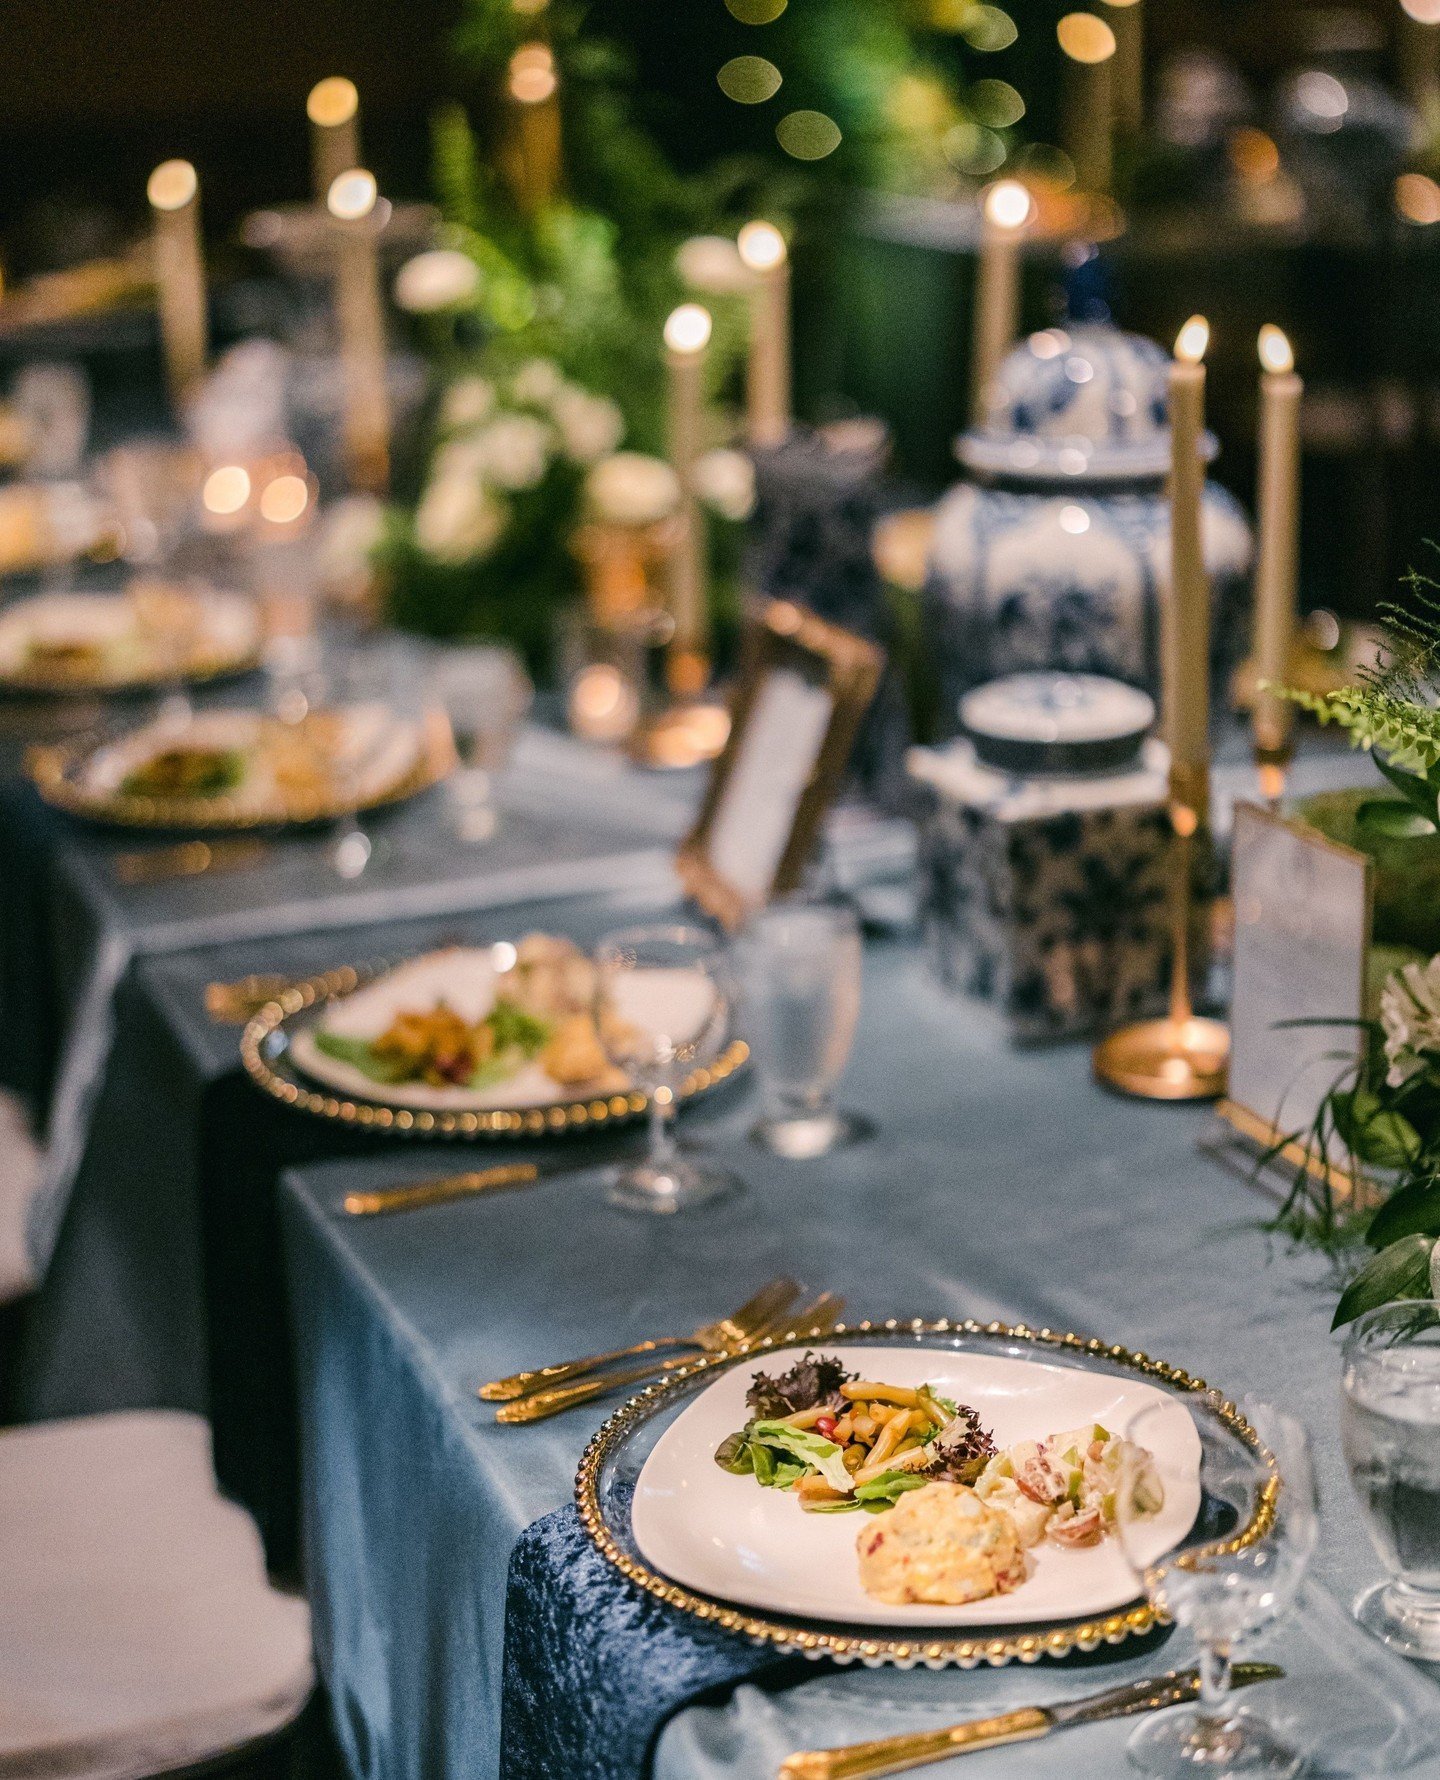 Just a taste of the artistry and attention to detail, where every aspect is meticulously crafted to enchant the senses. From lavish floral arrangements to lush garlands, our table scapes exude sophistication and class.⁠
&bull;⁠
&bull;⁠
&bull;⁠
| Flor